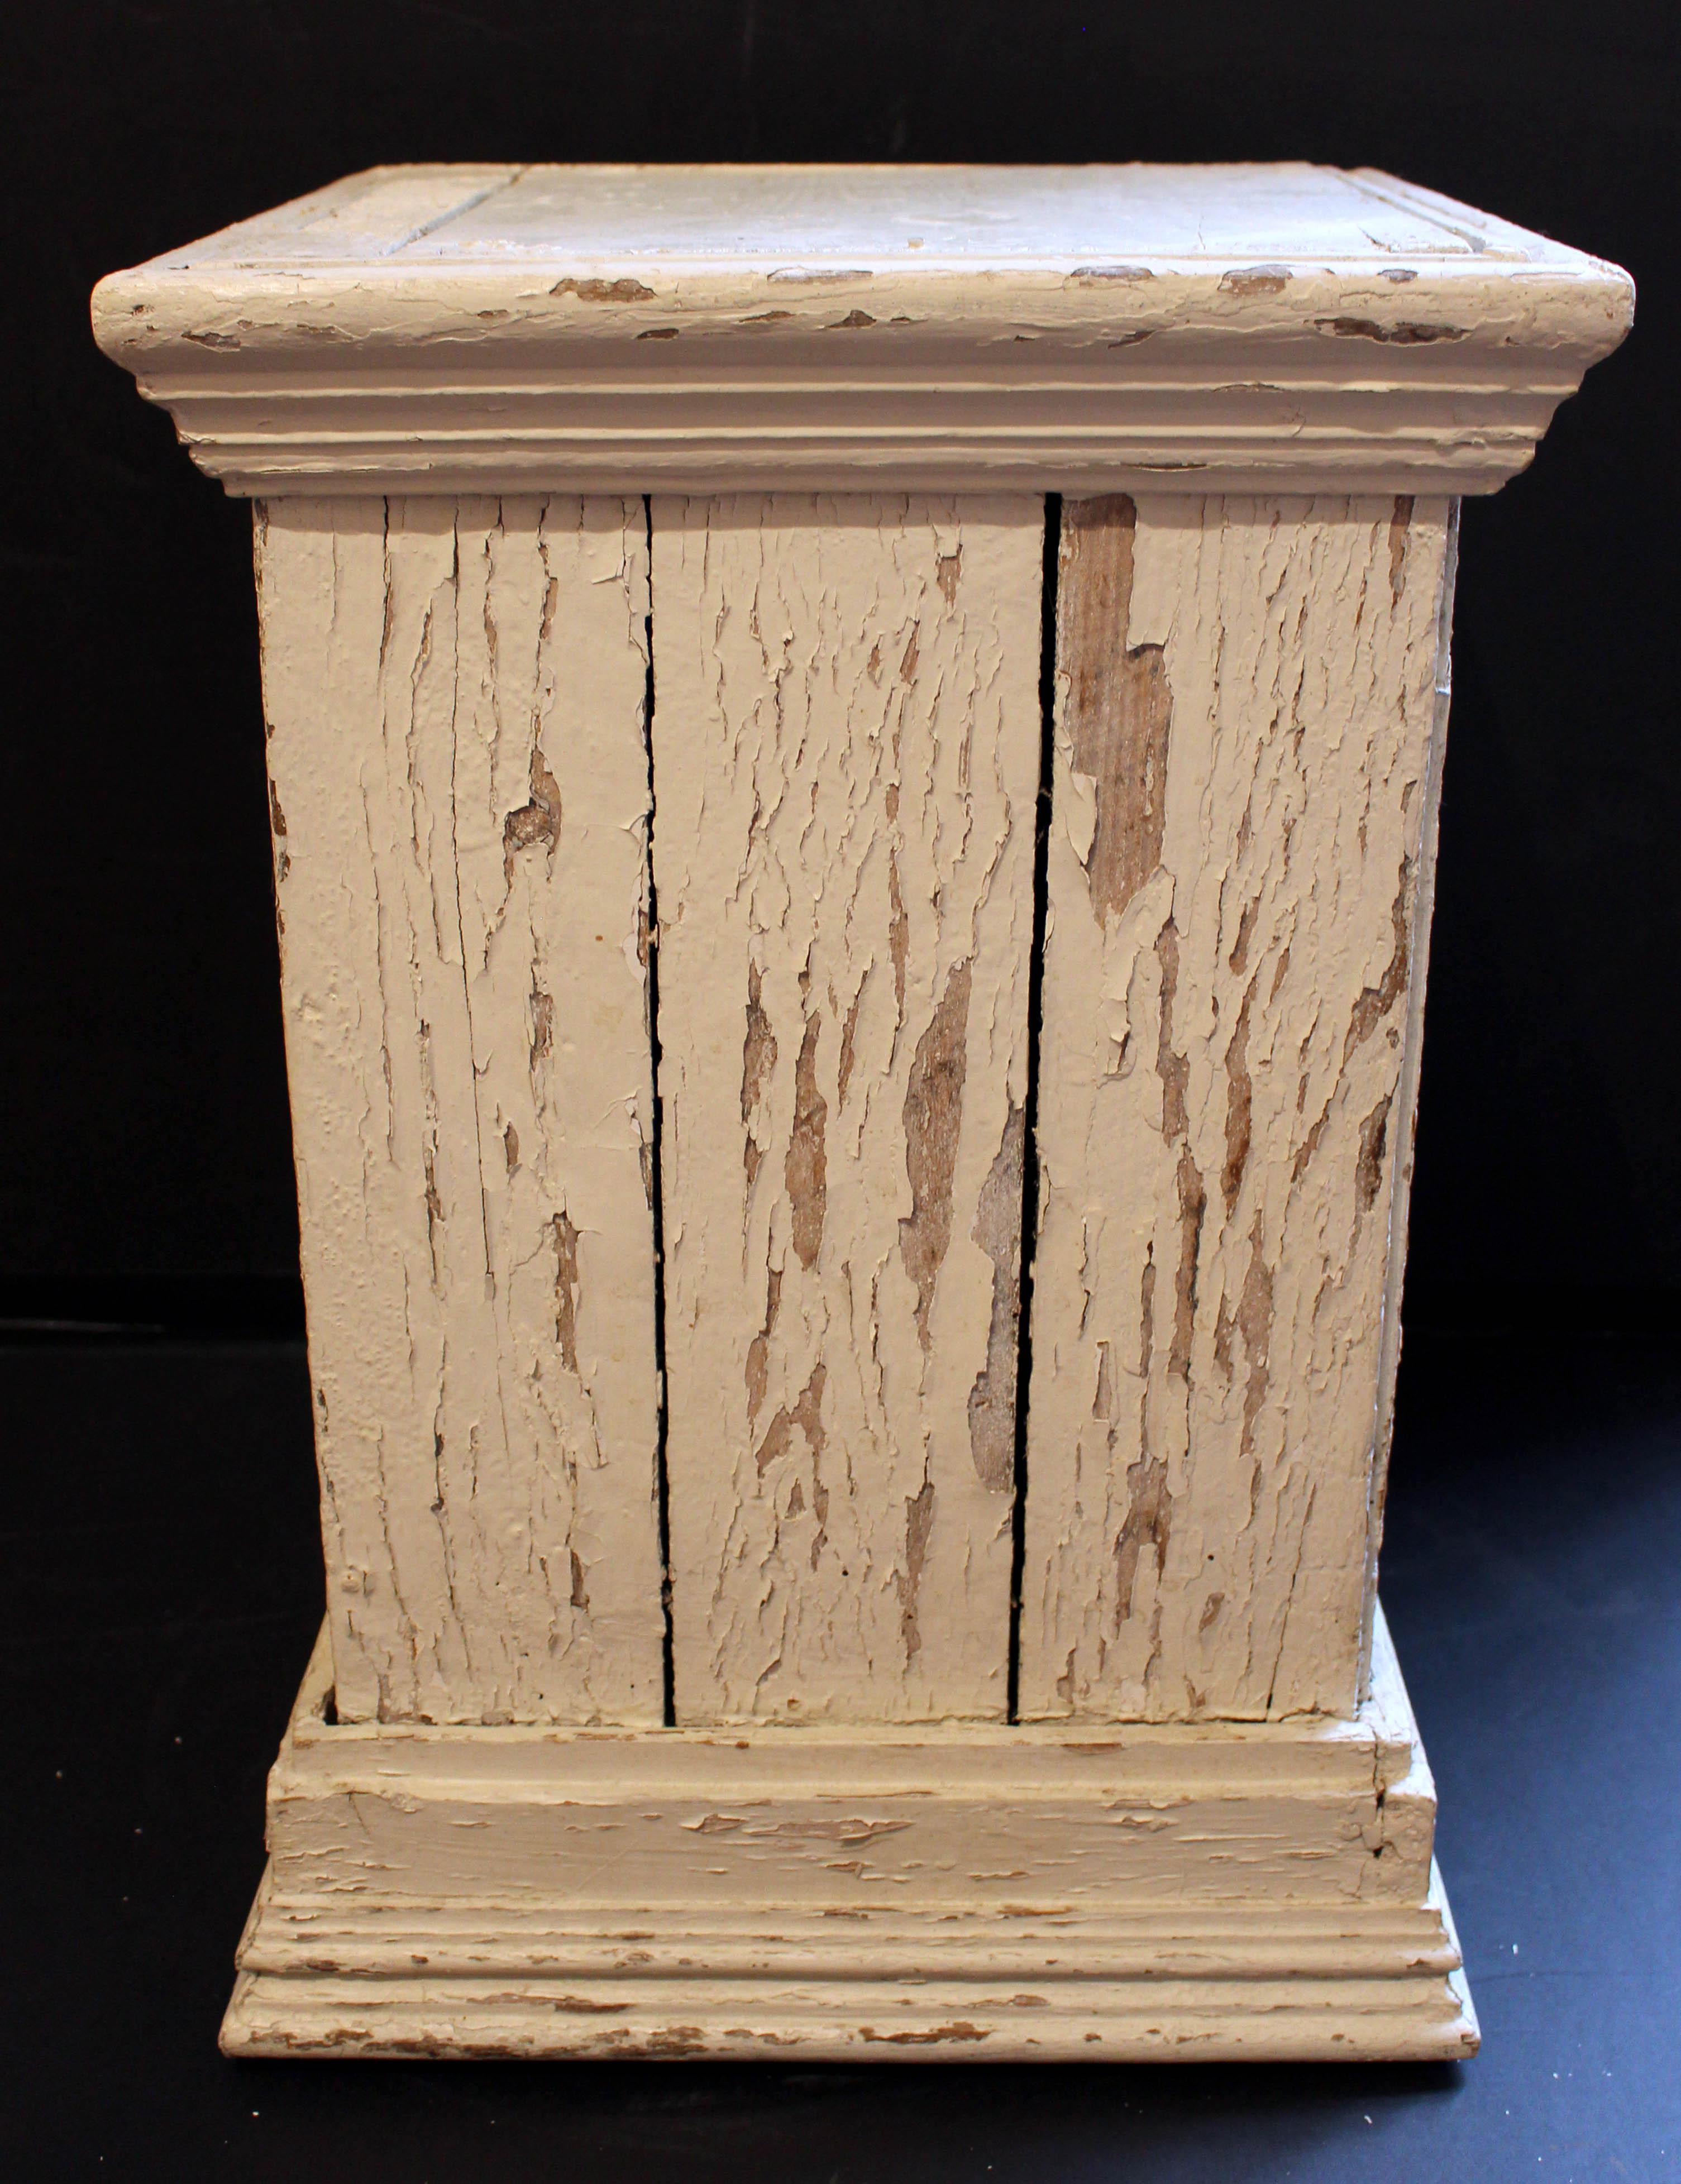 Wooden square plinth display pedestal, vintage, American. Charming old layers of worn paint.  Well molded top & base.
14.25